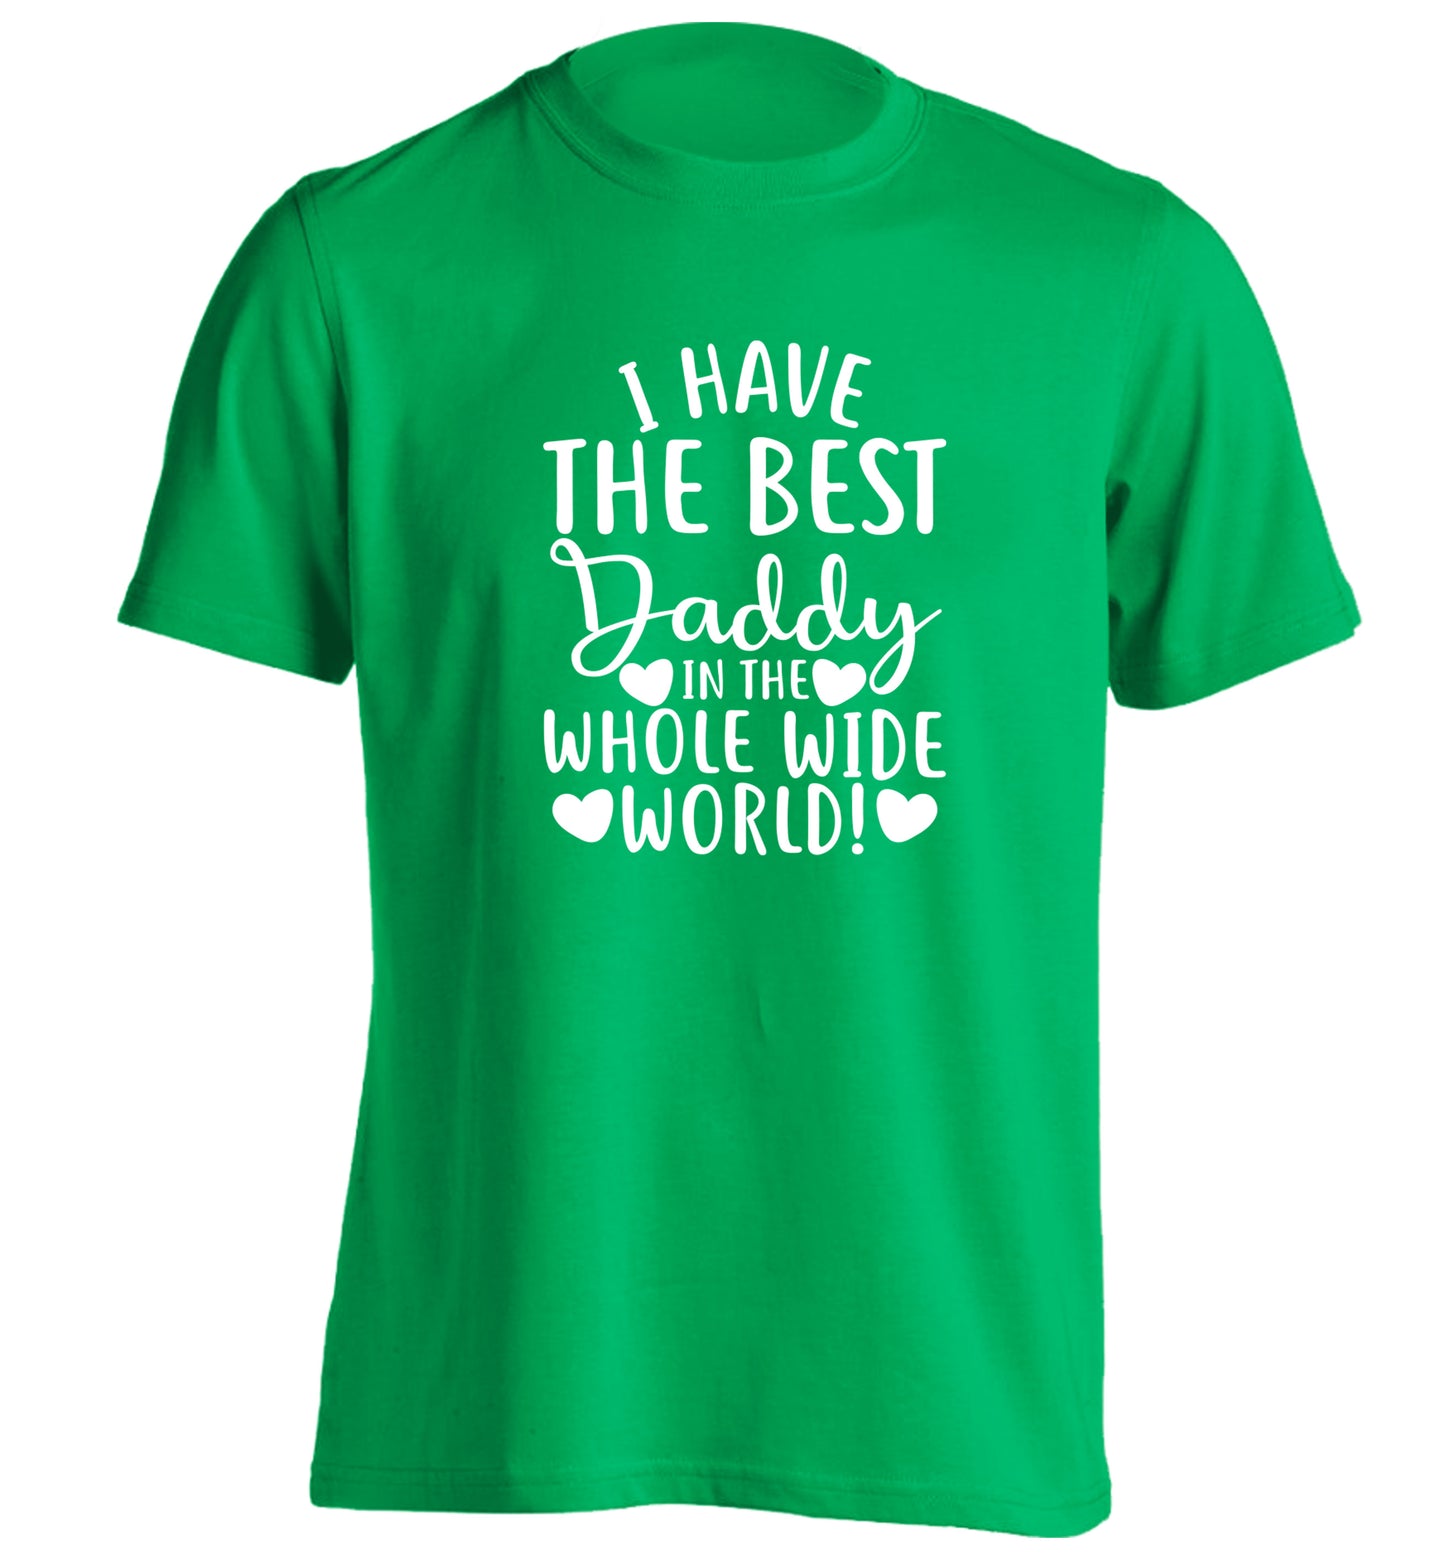 I have the best daddy in the whole wide world adults unisex green Tshirt 2XL